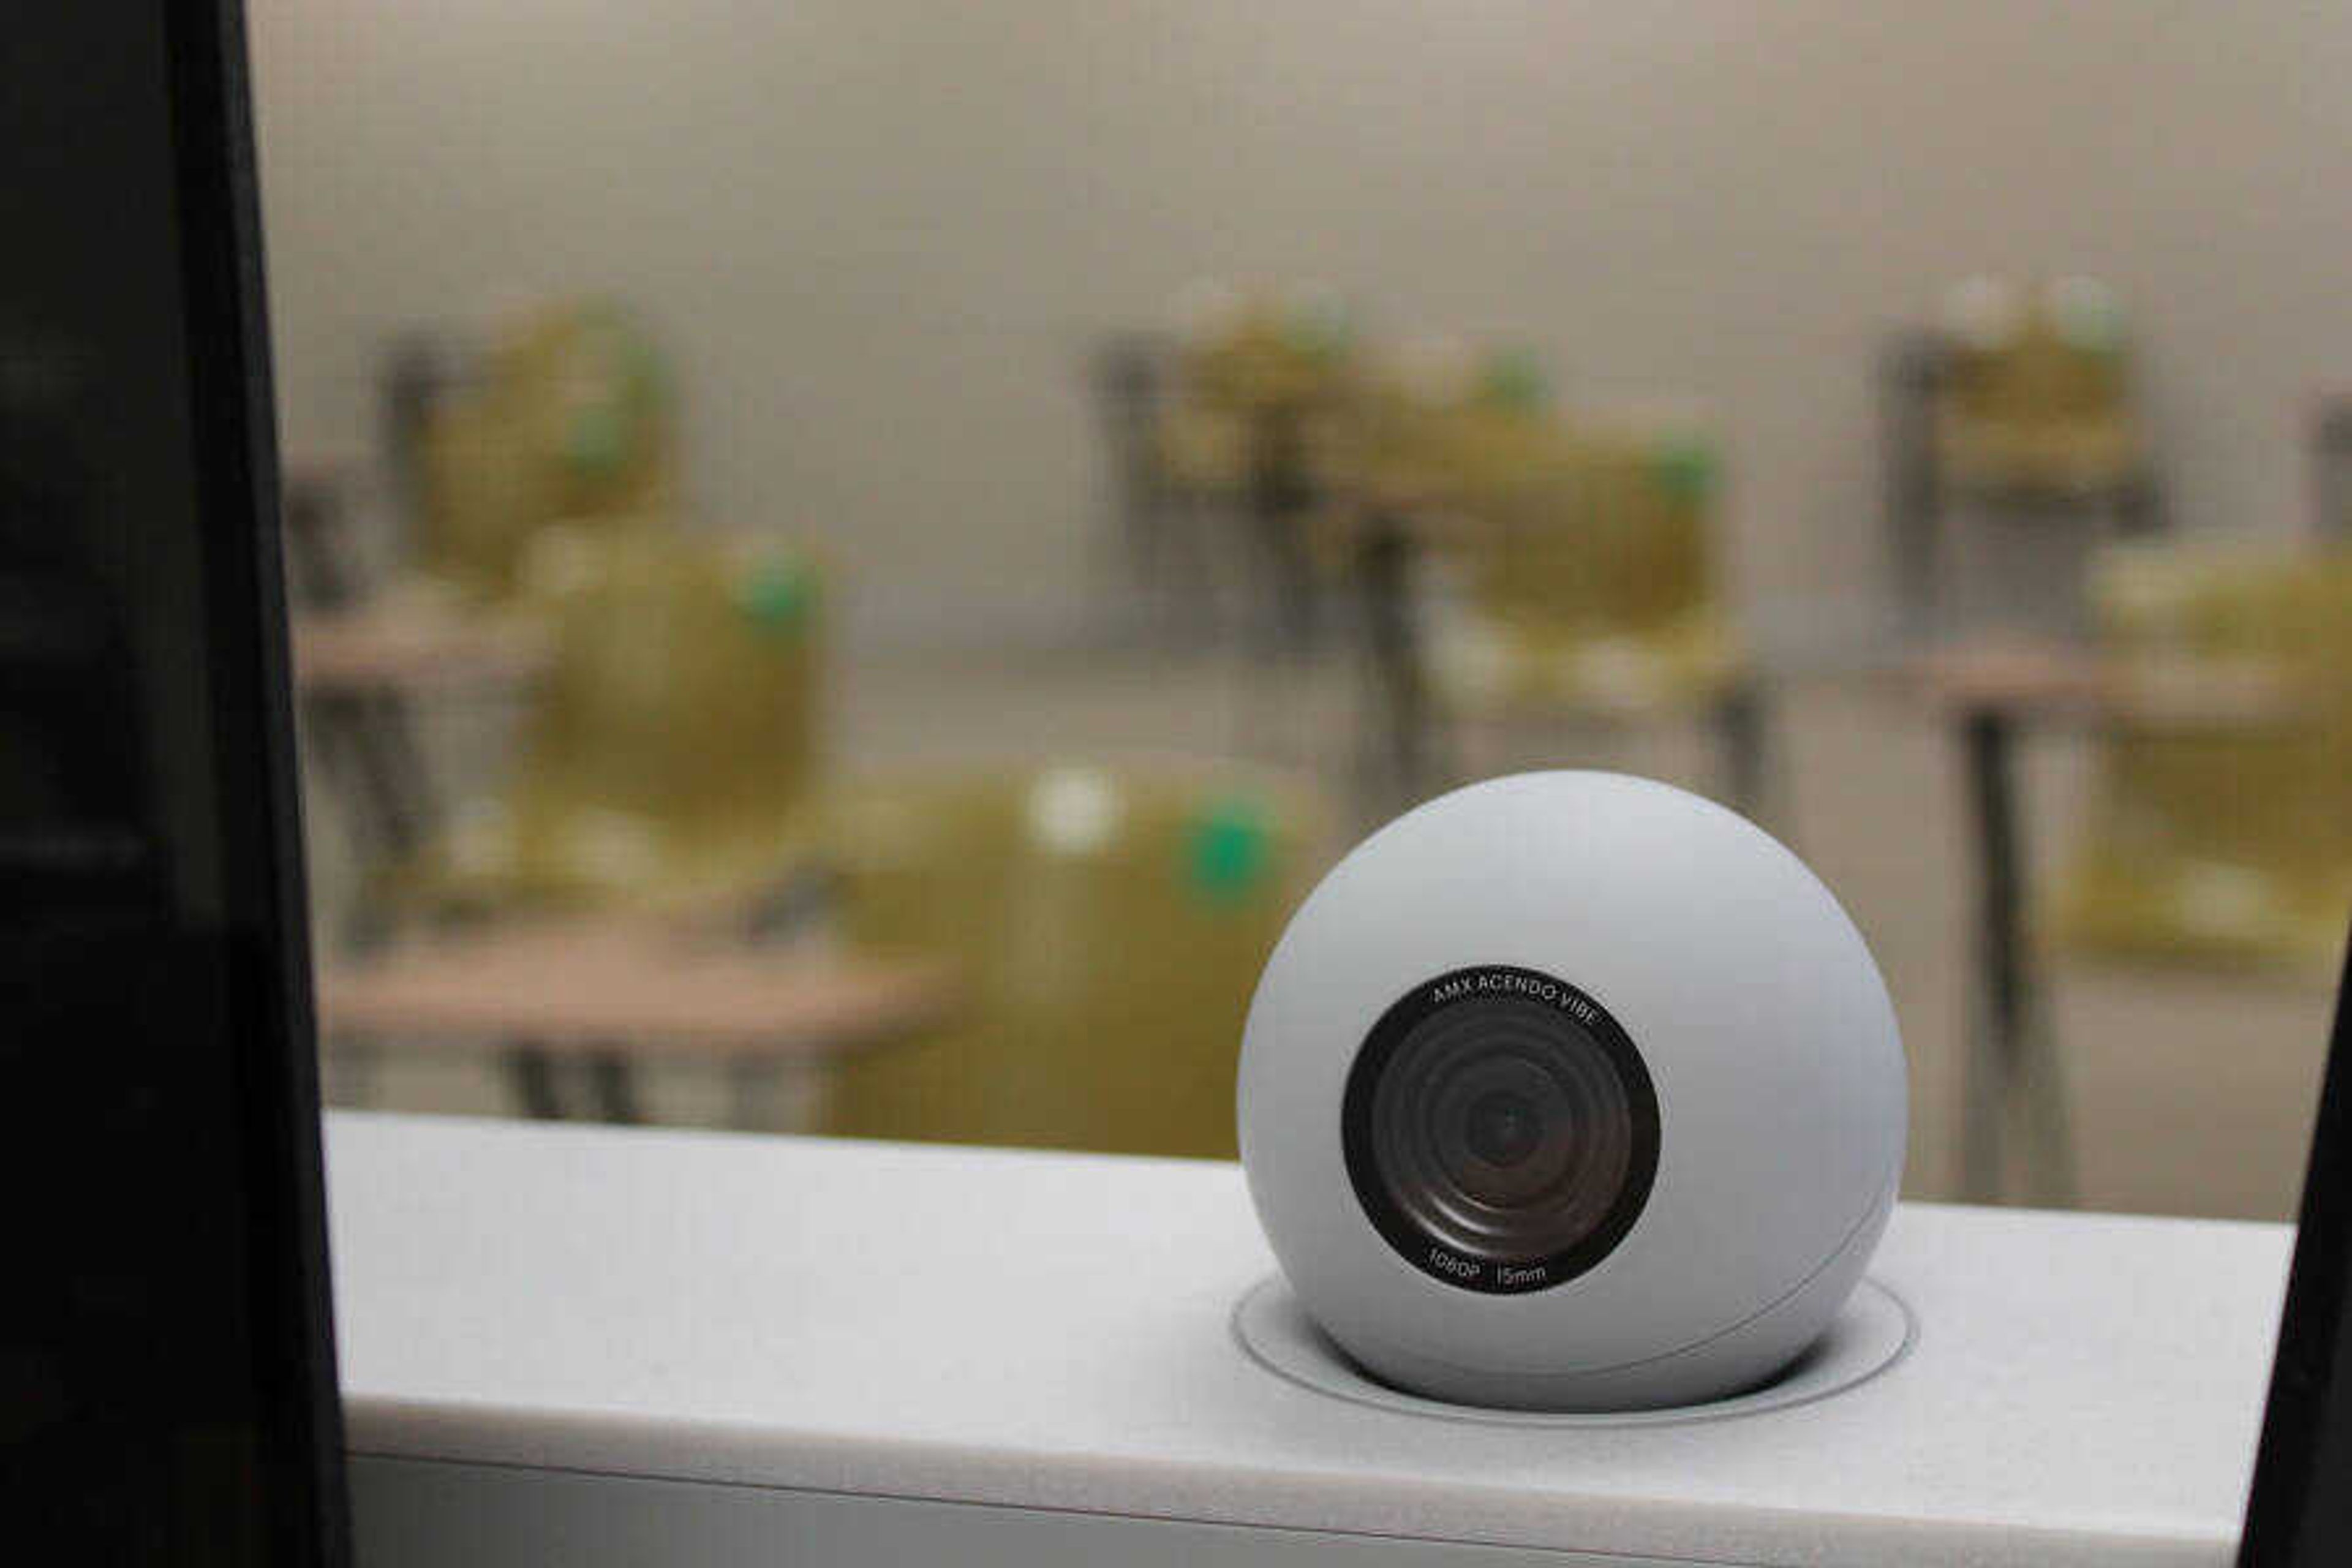 Some classrooms have been outfitted with new webcams as part of Southeast's HyFlex pilot program.